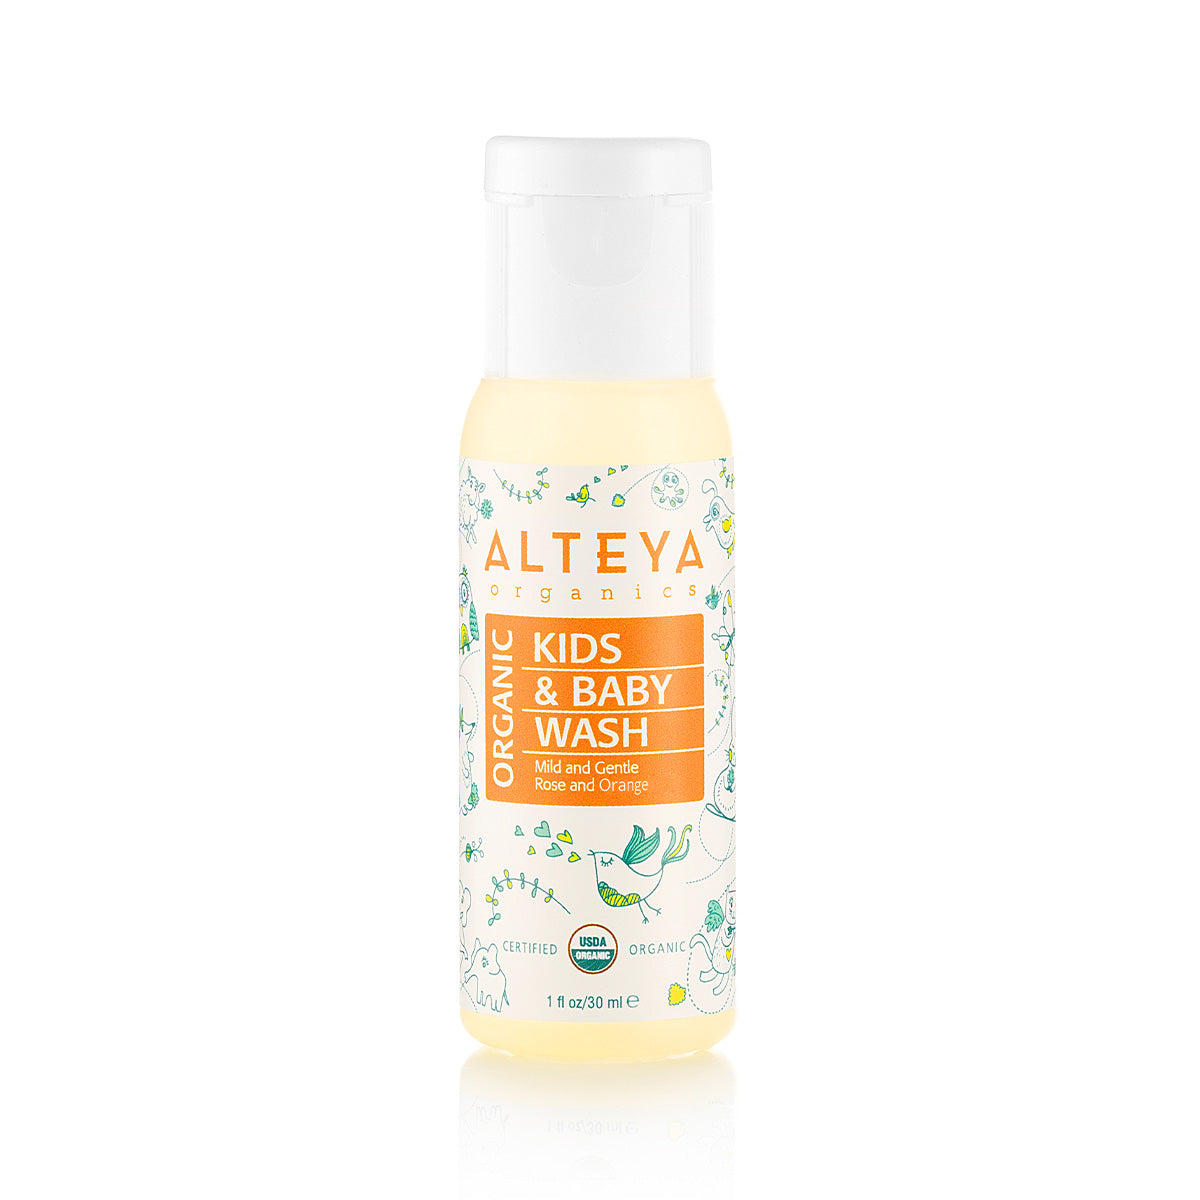 An Alteya Organics organic kids & baby body wash specifically formulated for sensitive skin, called the Organic Baby Wash Mild and Gentle 1 Fl Oz.